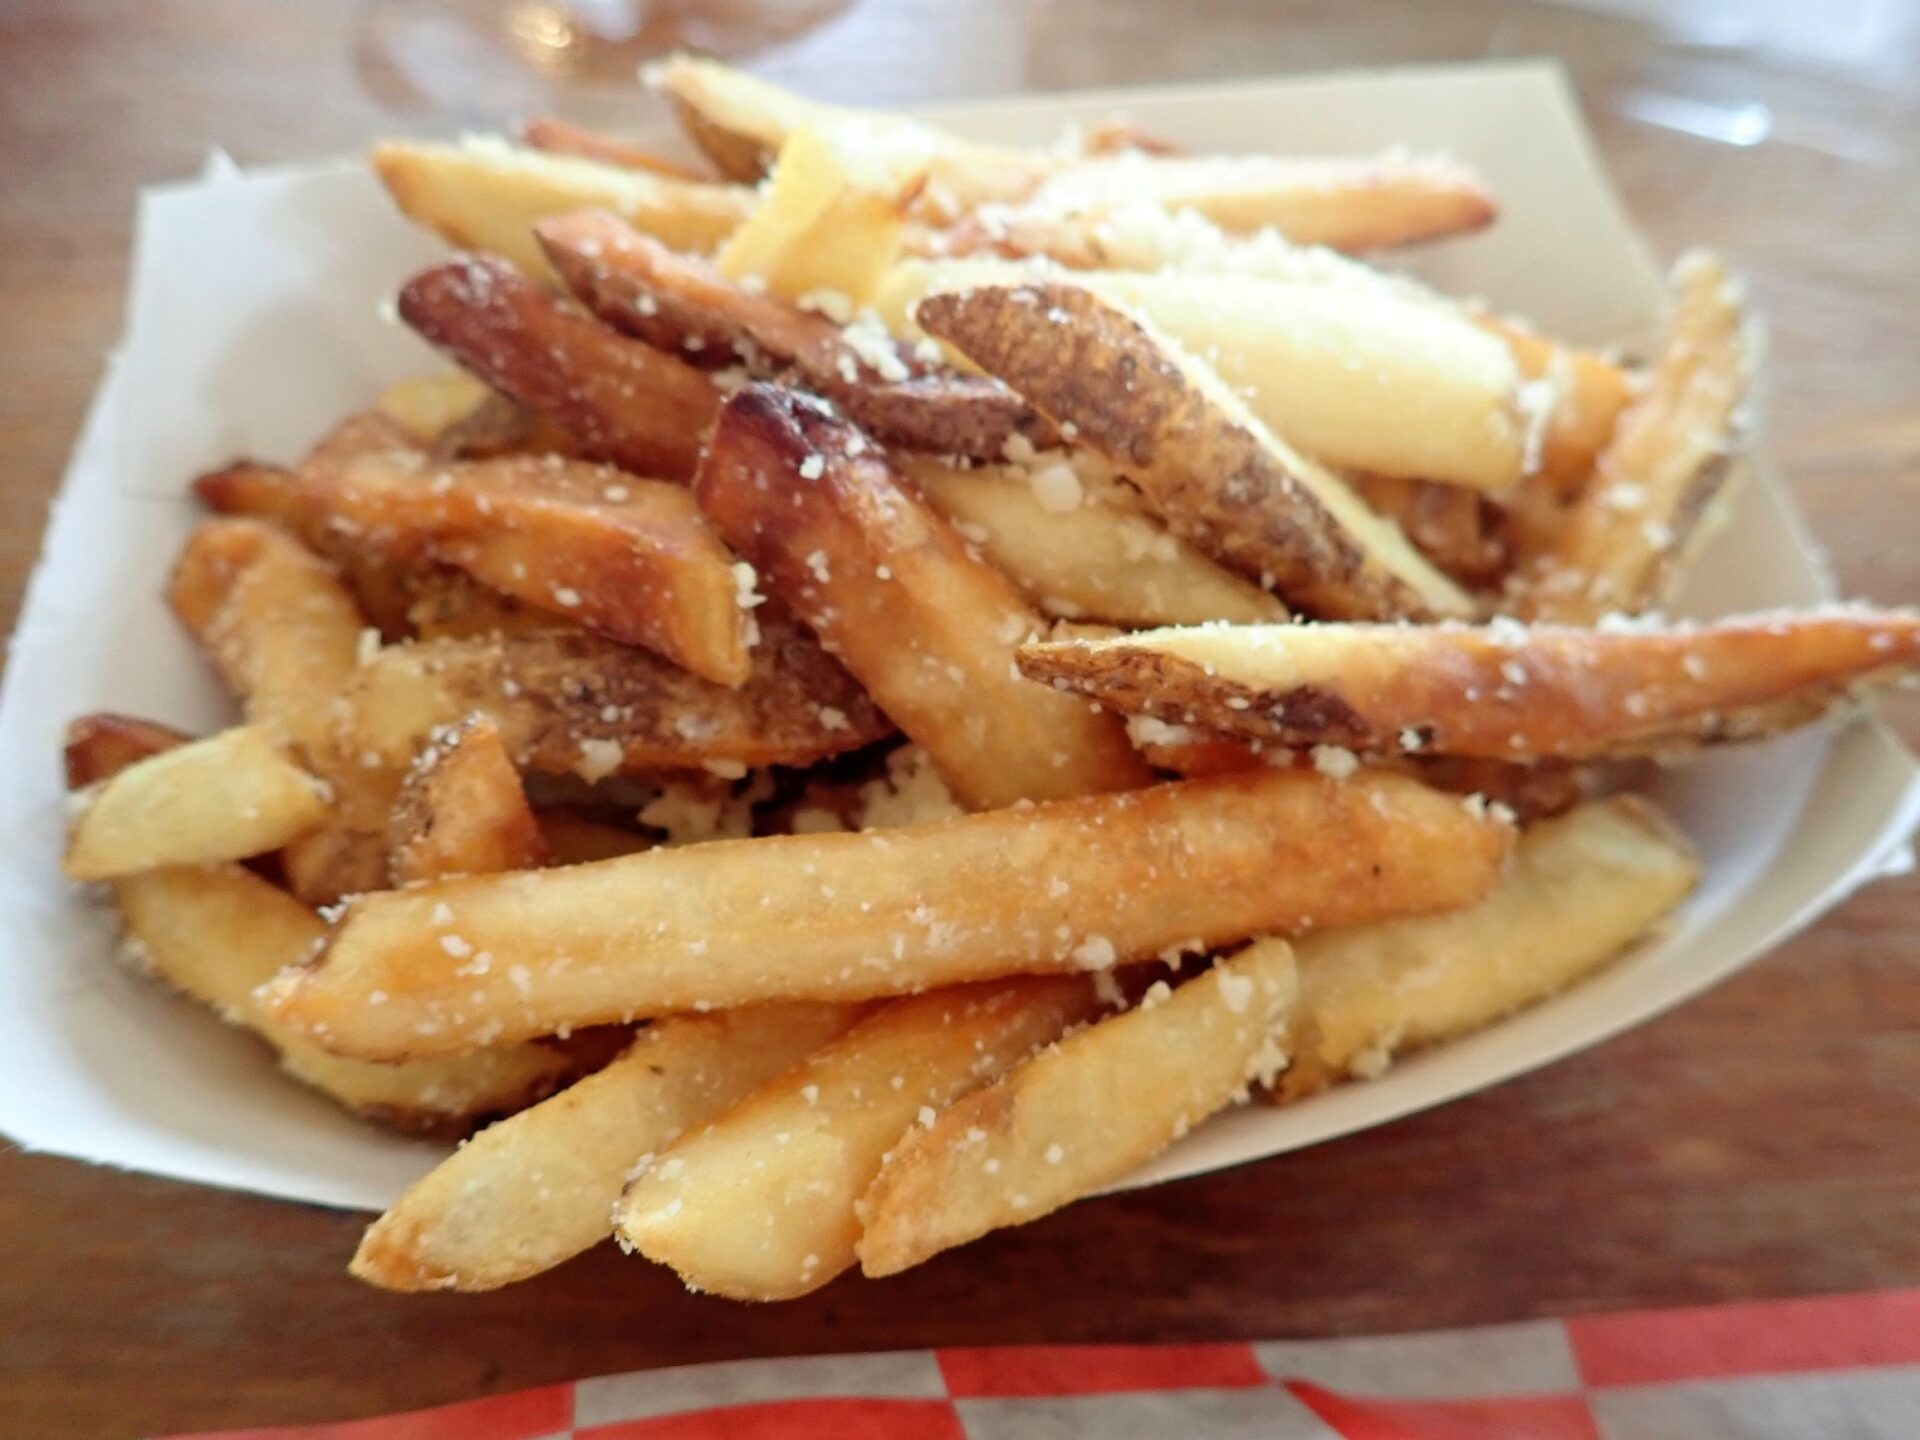 Delicious sea salt fries from St Ambrose Cellars